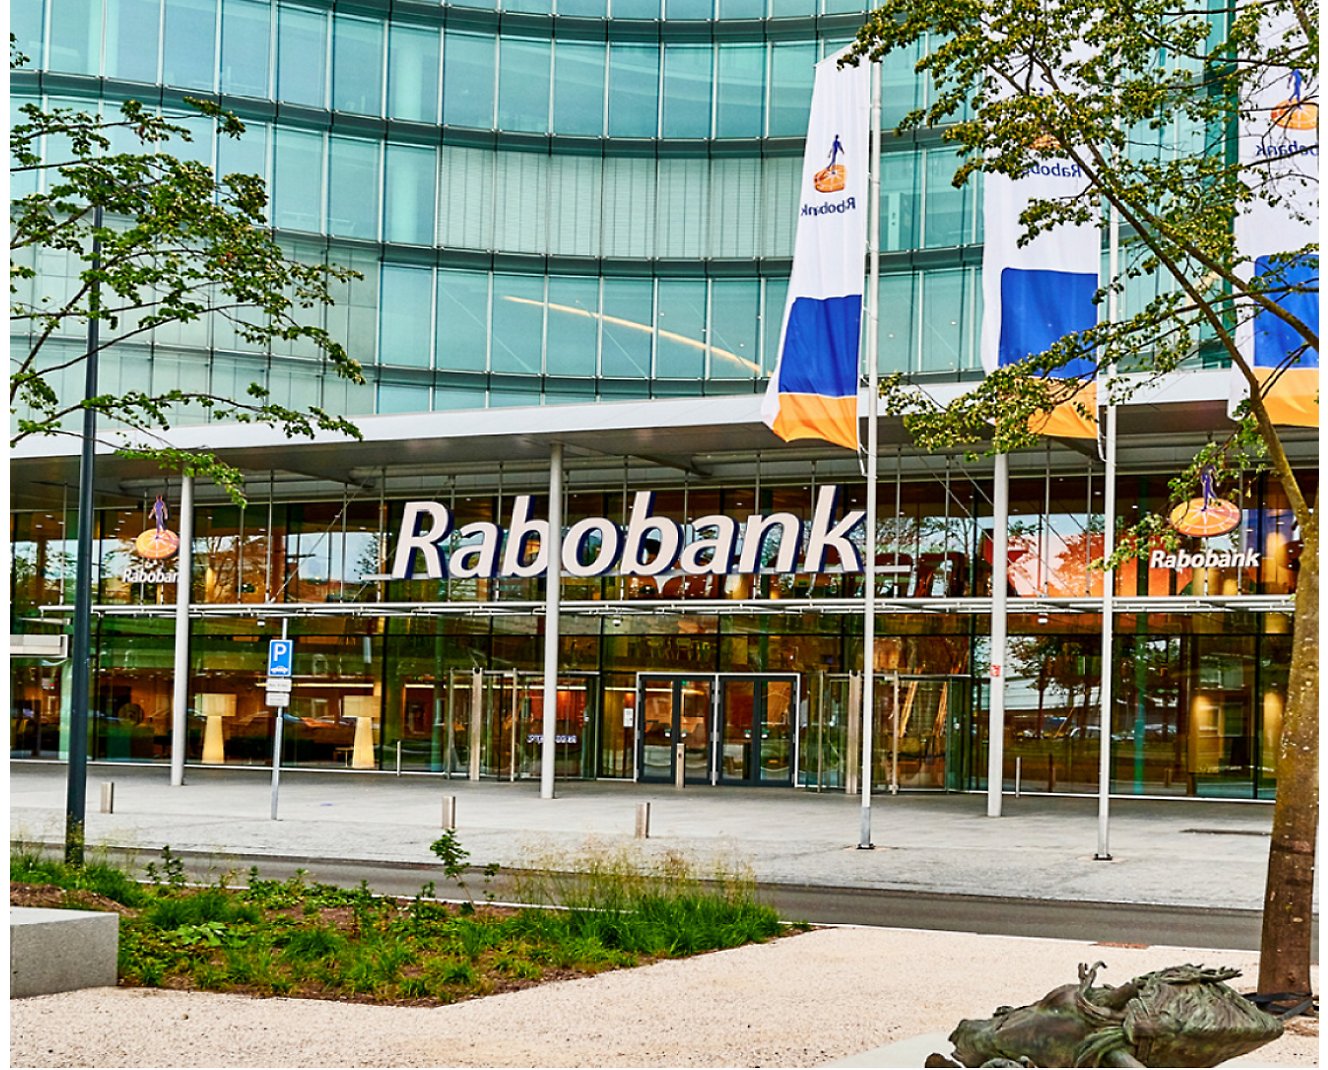 A building with a sign that says Rabobank.